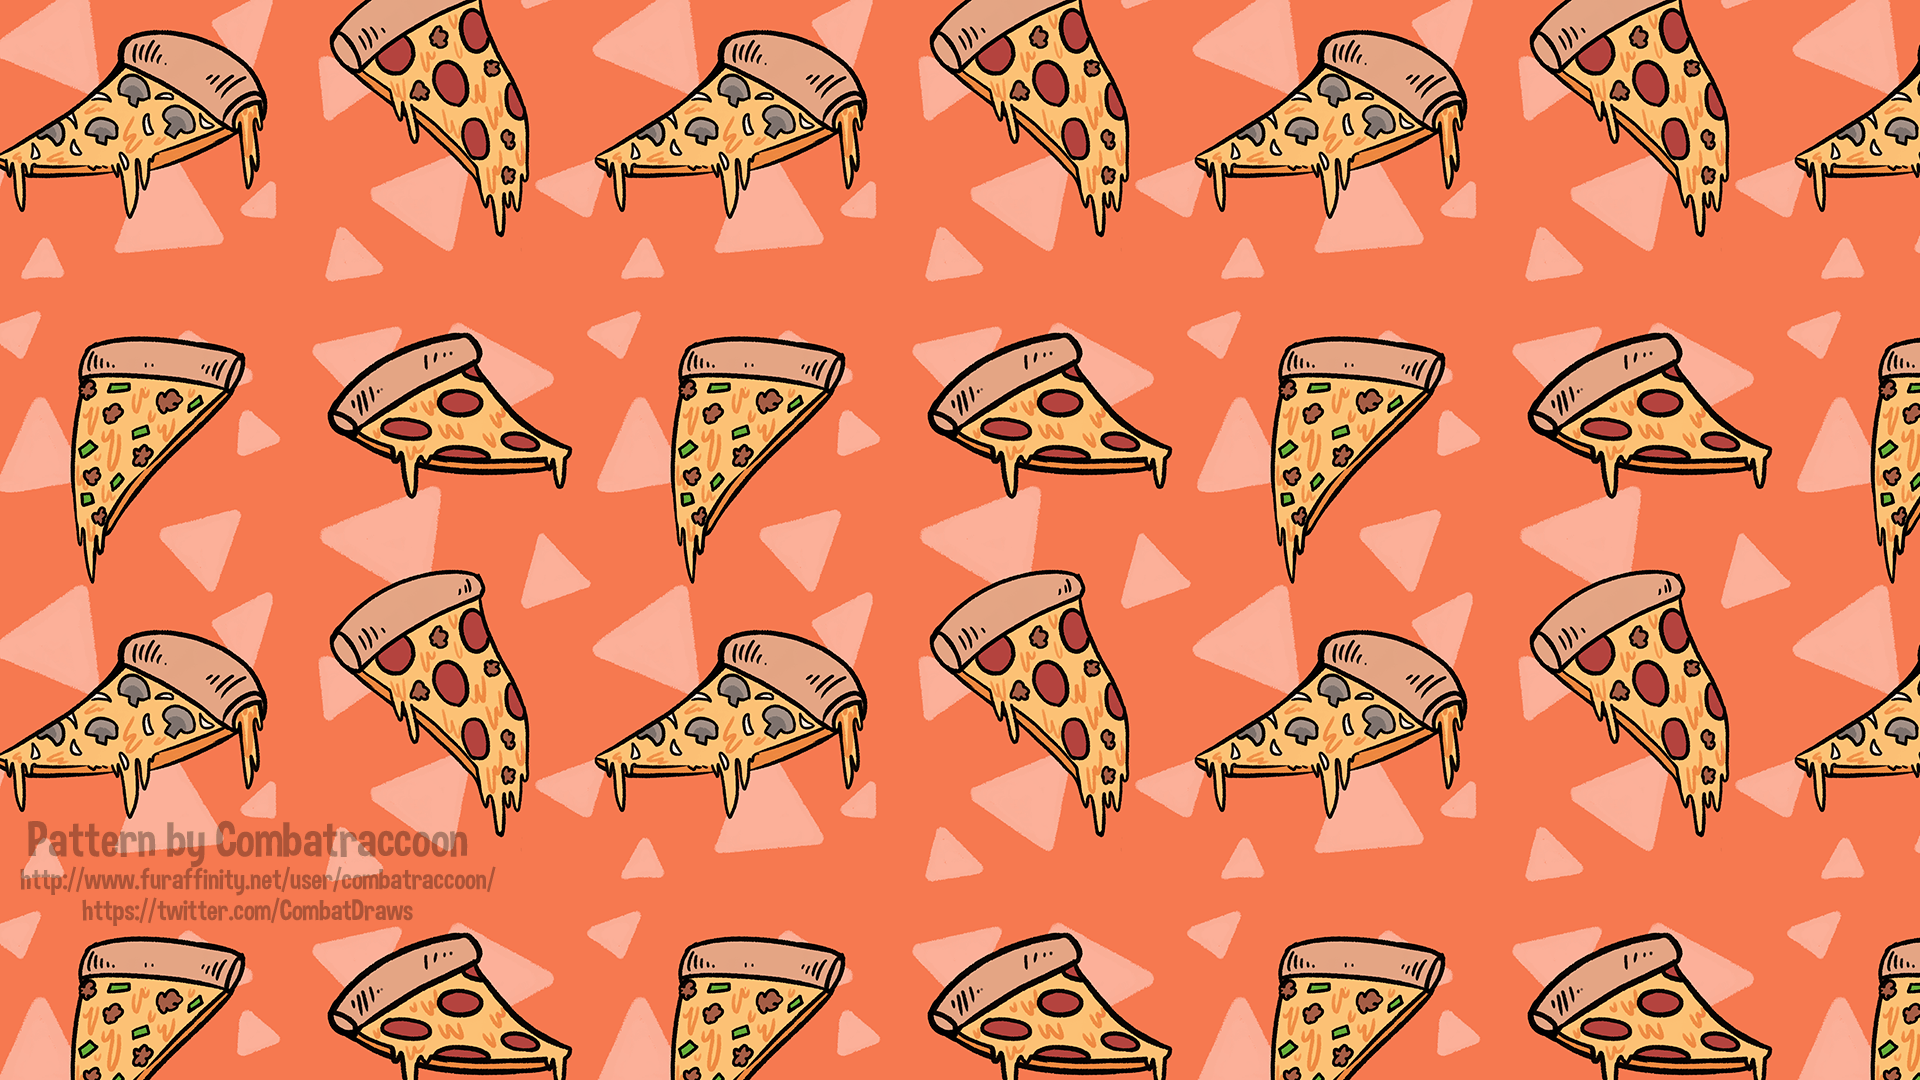 A pattern of pizza slices on a pink background - Pizza